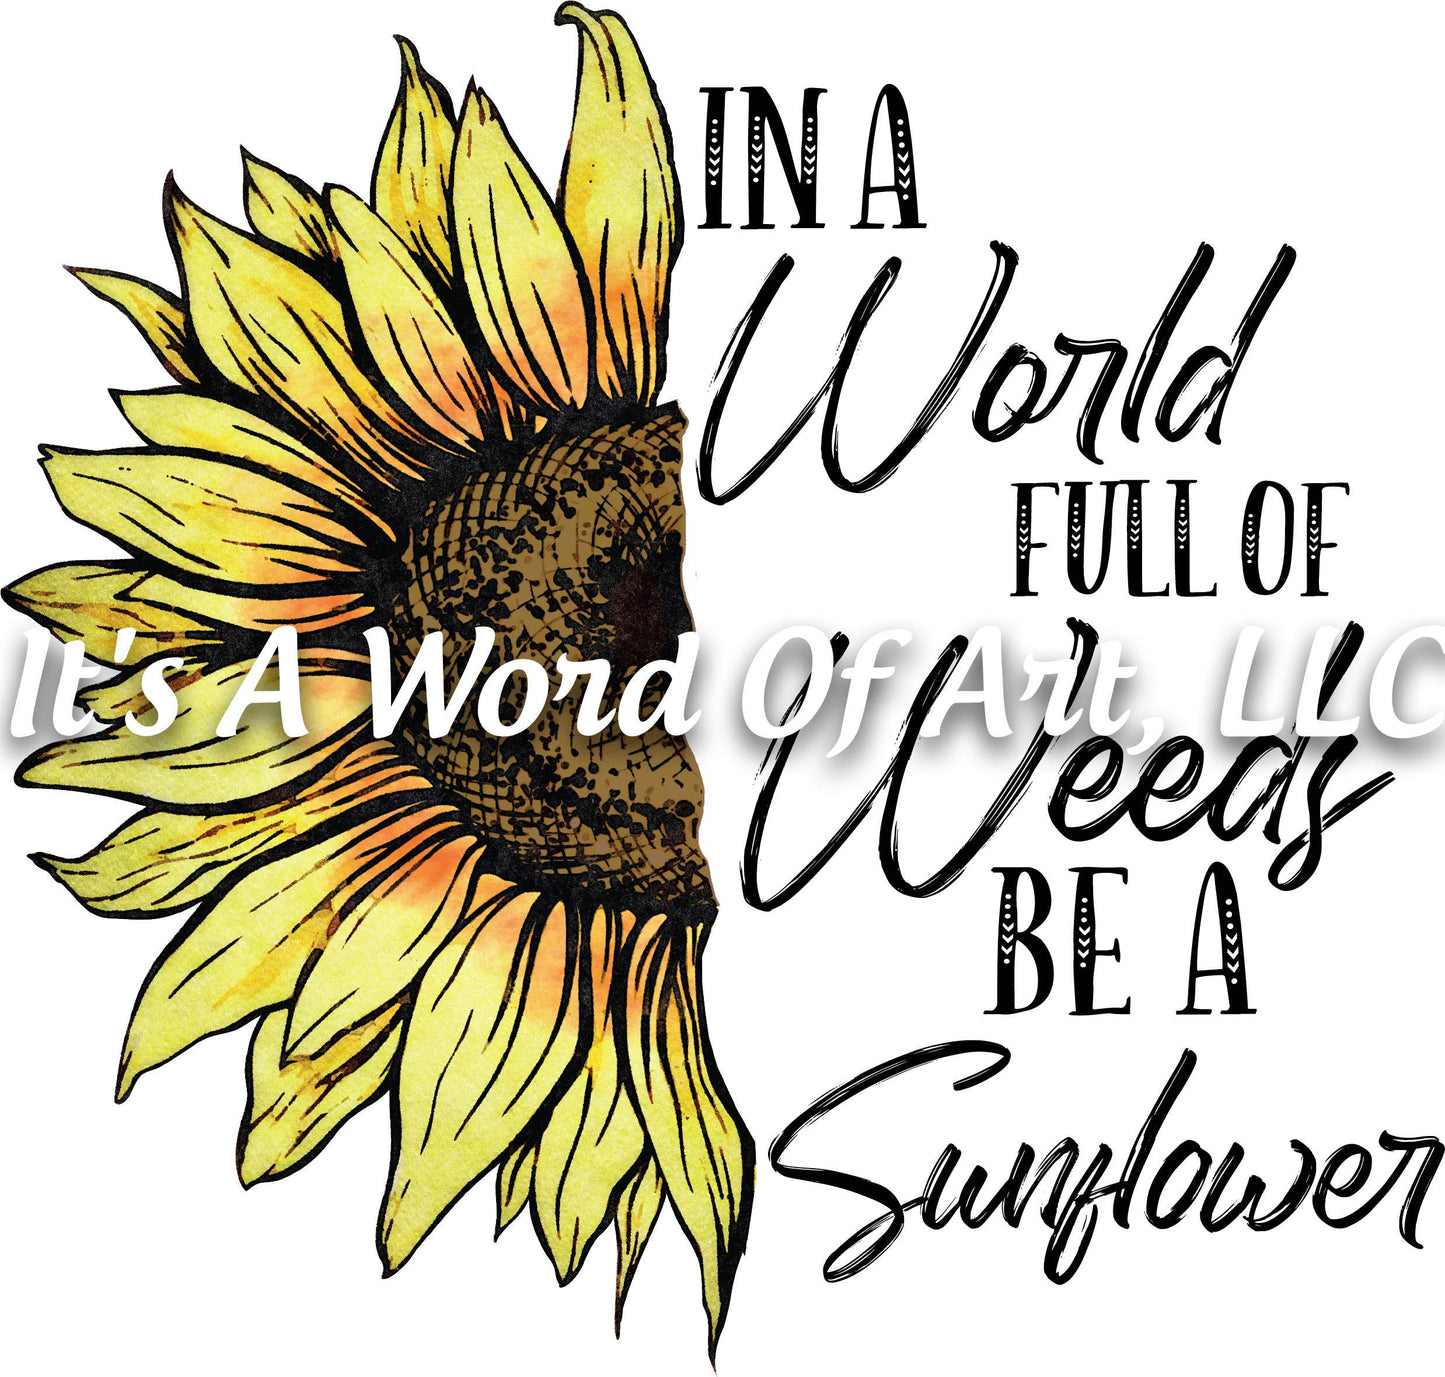 Sunflower 13 - World Full of Weeds Sunflower Sublimation Transfer Set/Ready To Press Sublimation Transfer/Sublimation Transfer